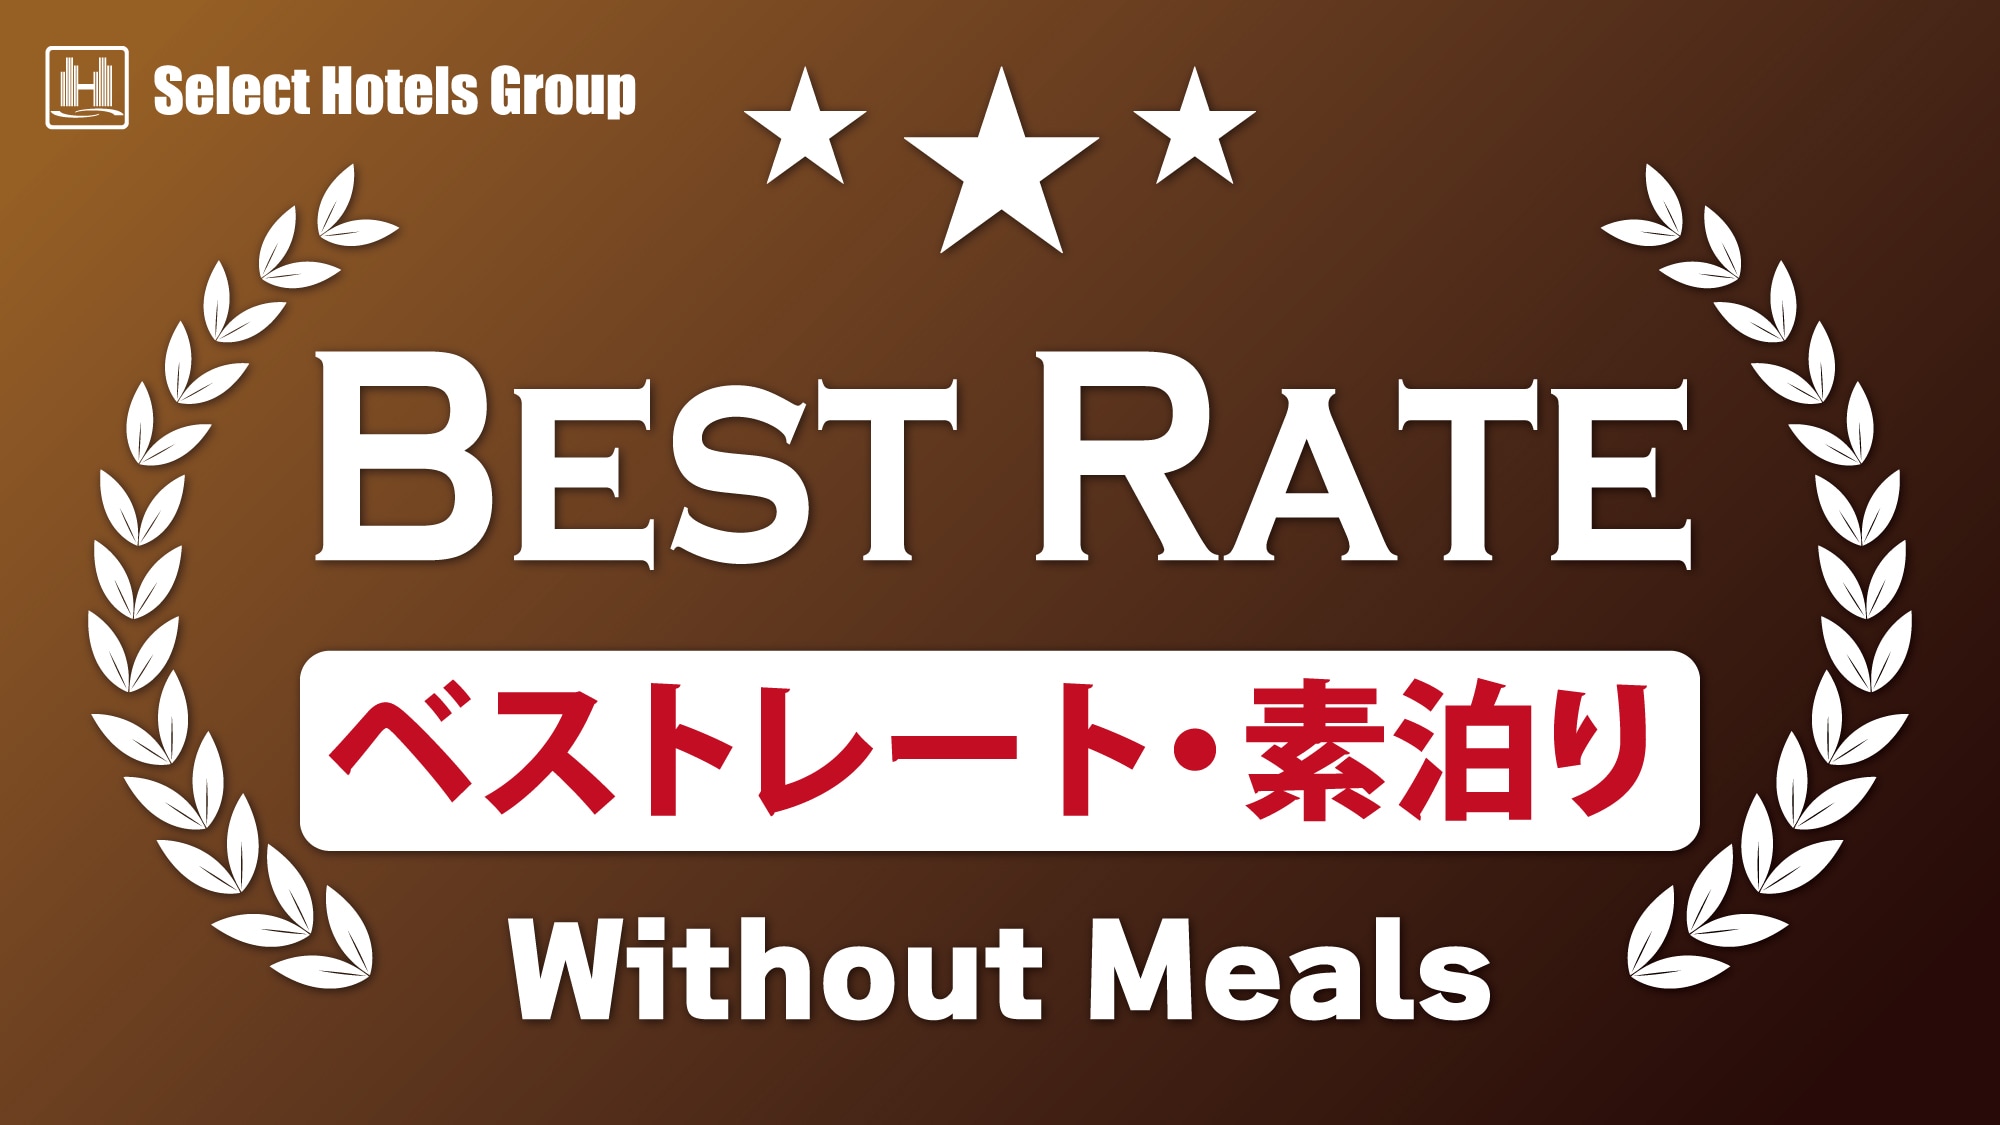 Best_Stay 不吃飯